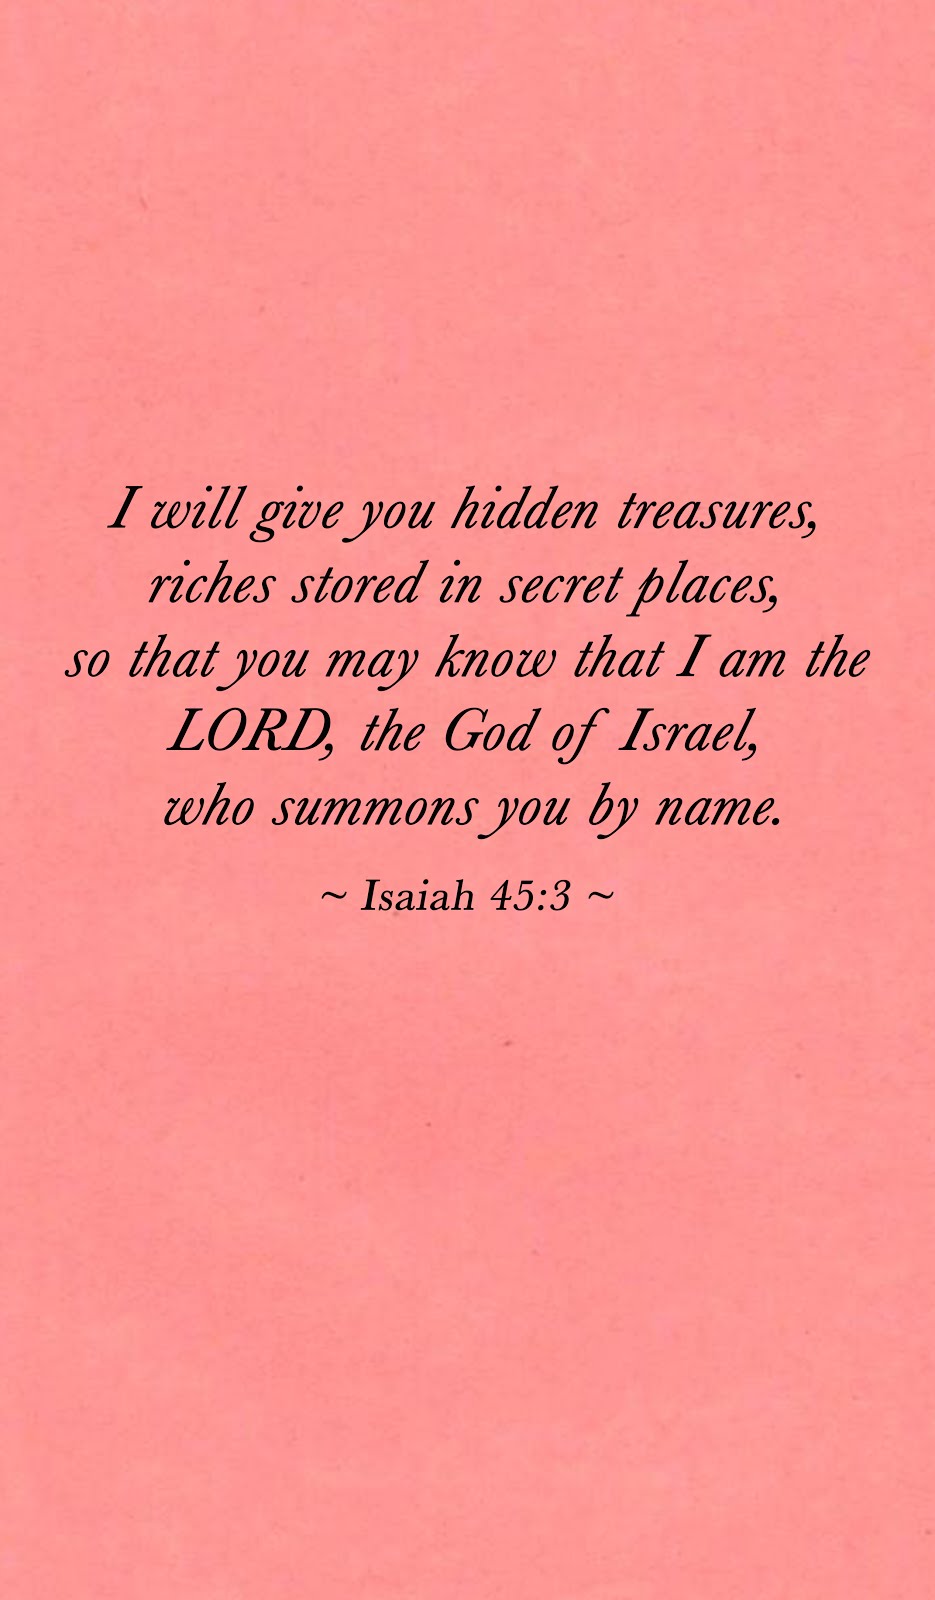 Hidden Treasures - A Story That Changed my Life - Something Delightful Blog Isaiah 45:3